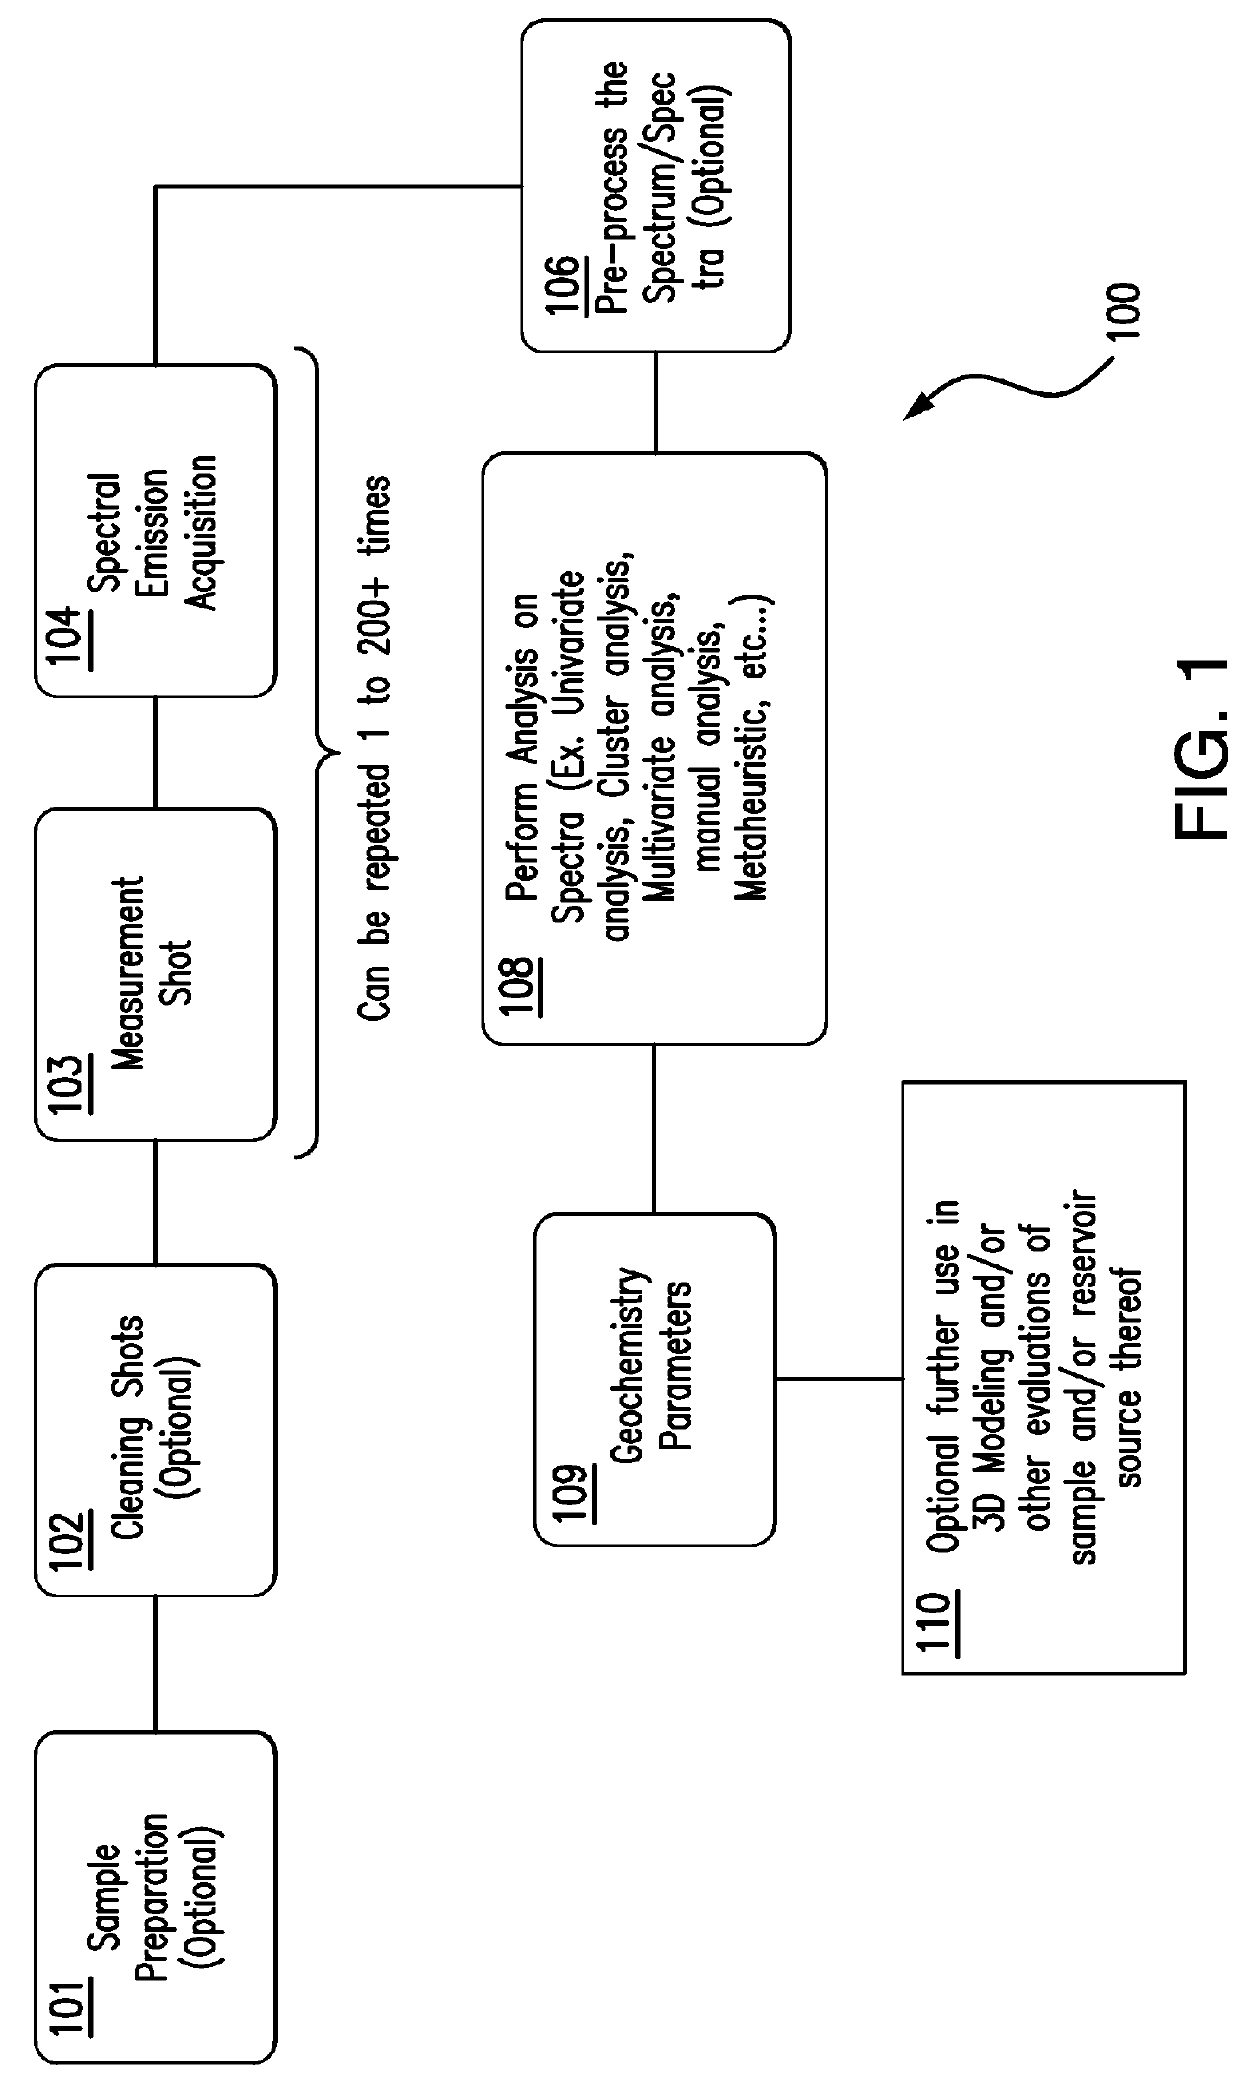 Method And System For Obtaining Geochemistry Information From Pyrolysis Induced By Laser Induced Breakdown Spectroscopy